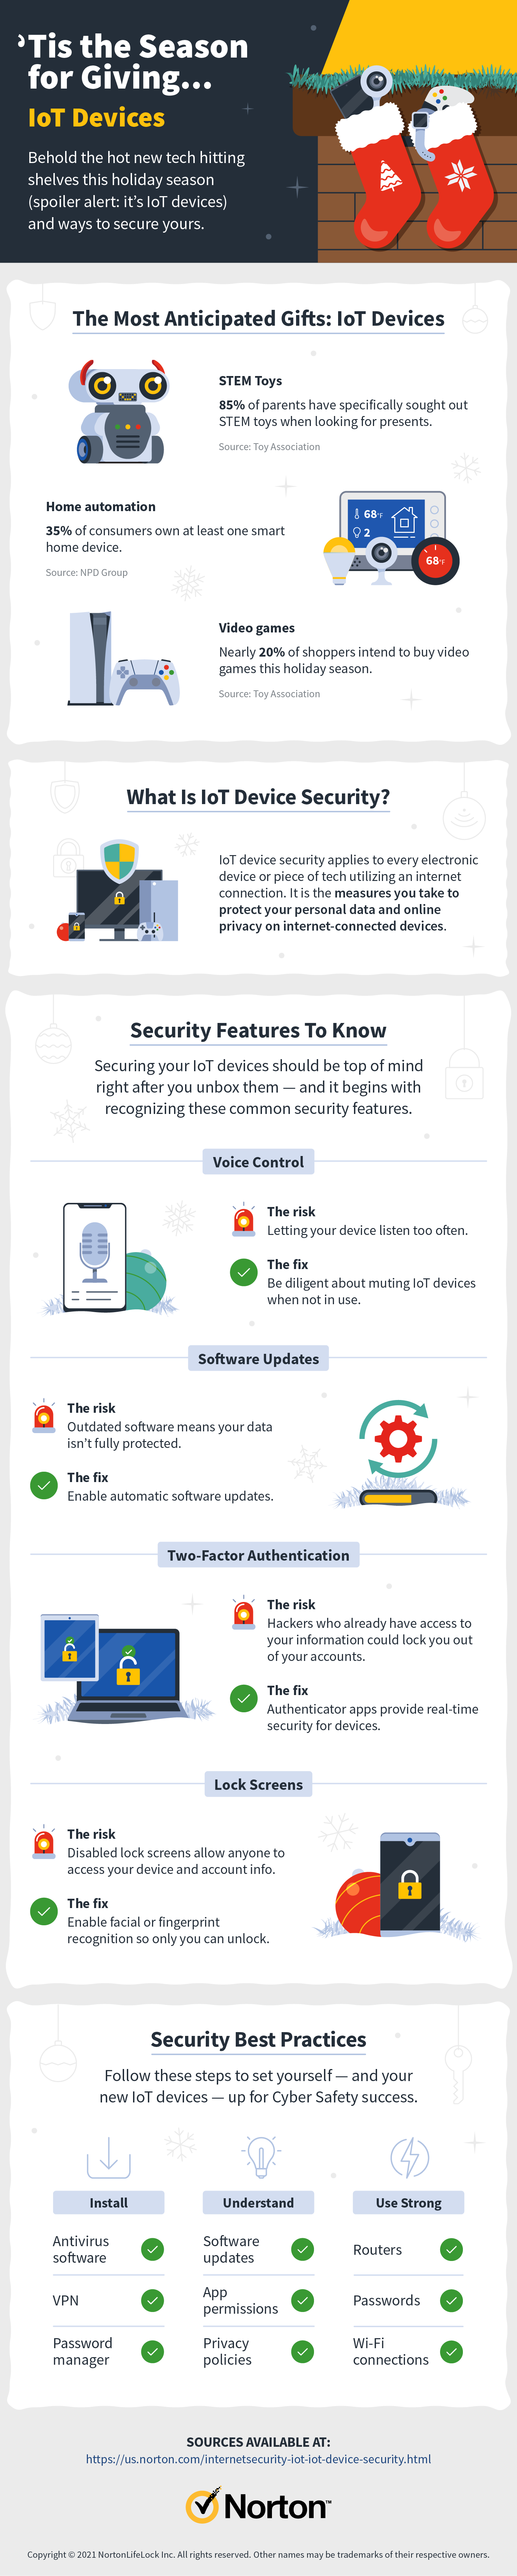 An infographic overviews the importance of IoT device security and the popularity of IoT devices during the holiday season, including the most anticipated IoT devices and IoT device security best practices to keep in mind. 